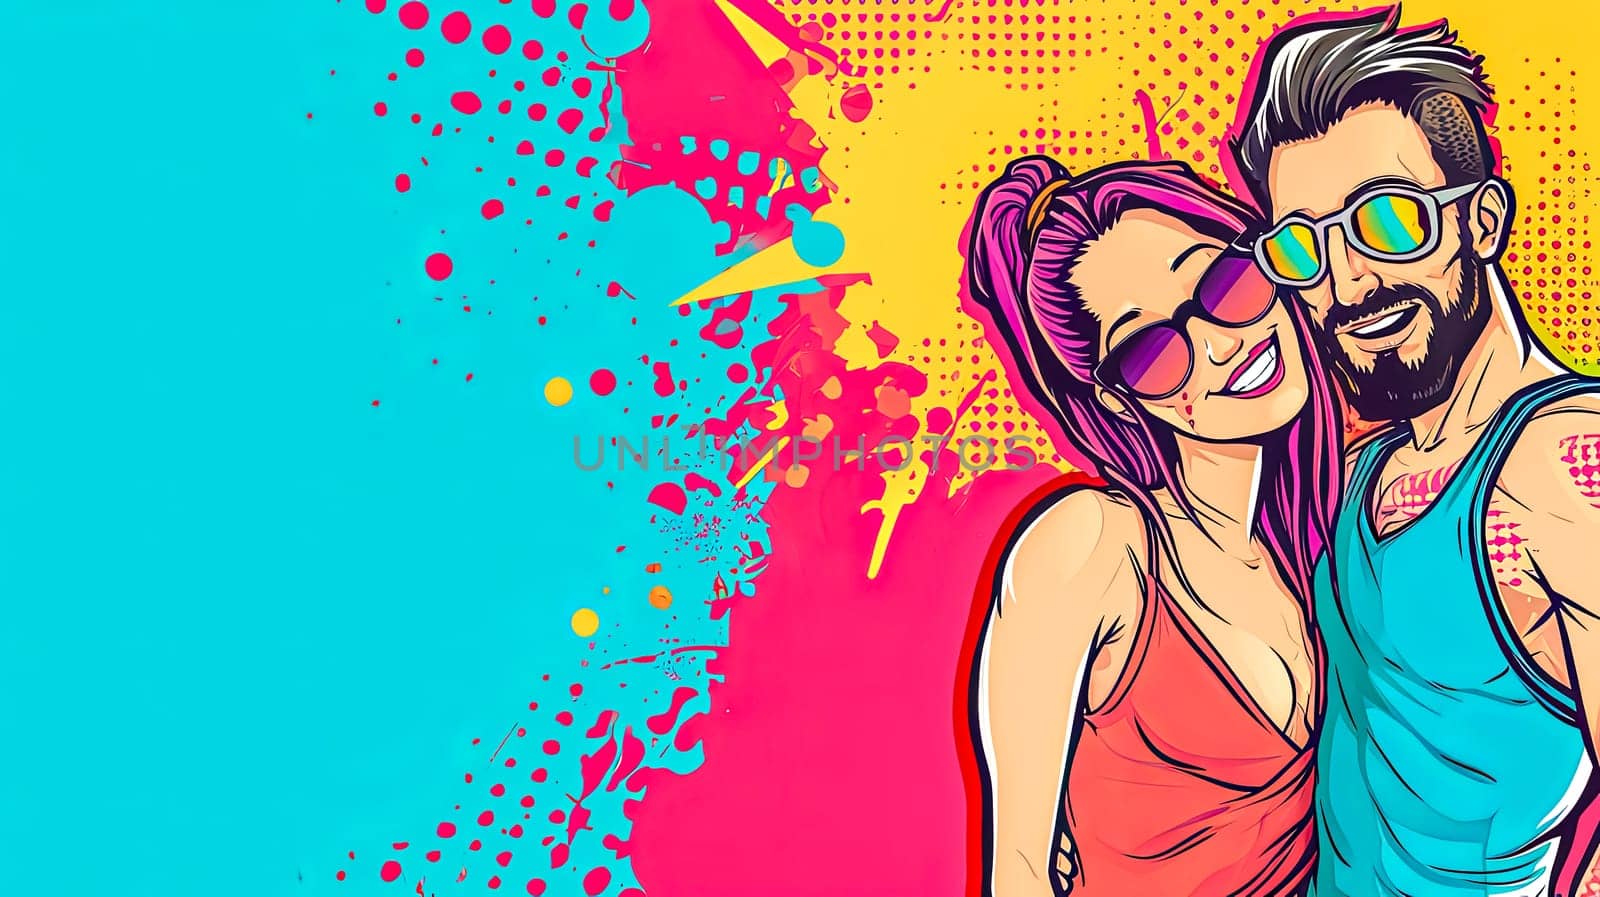 cartoon-style couple in sunglasses, exuding happiness and playfulness against a backdrop of vivid turquoise and magenta splashes